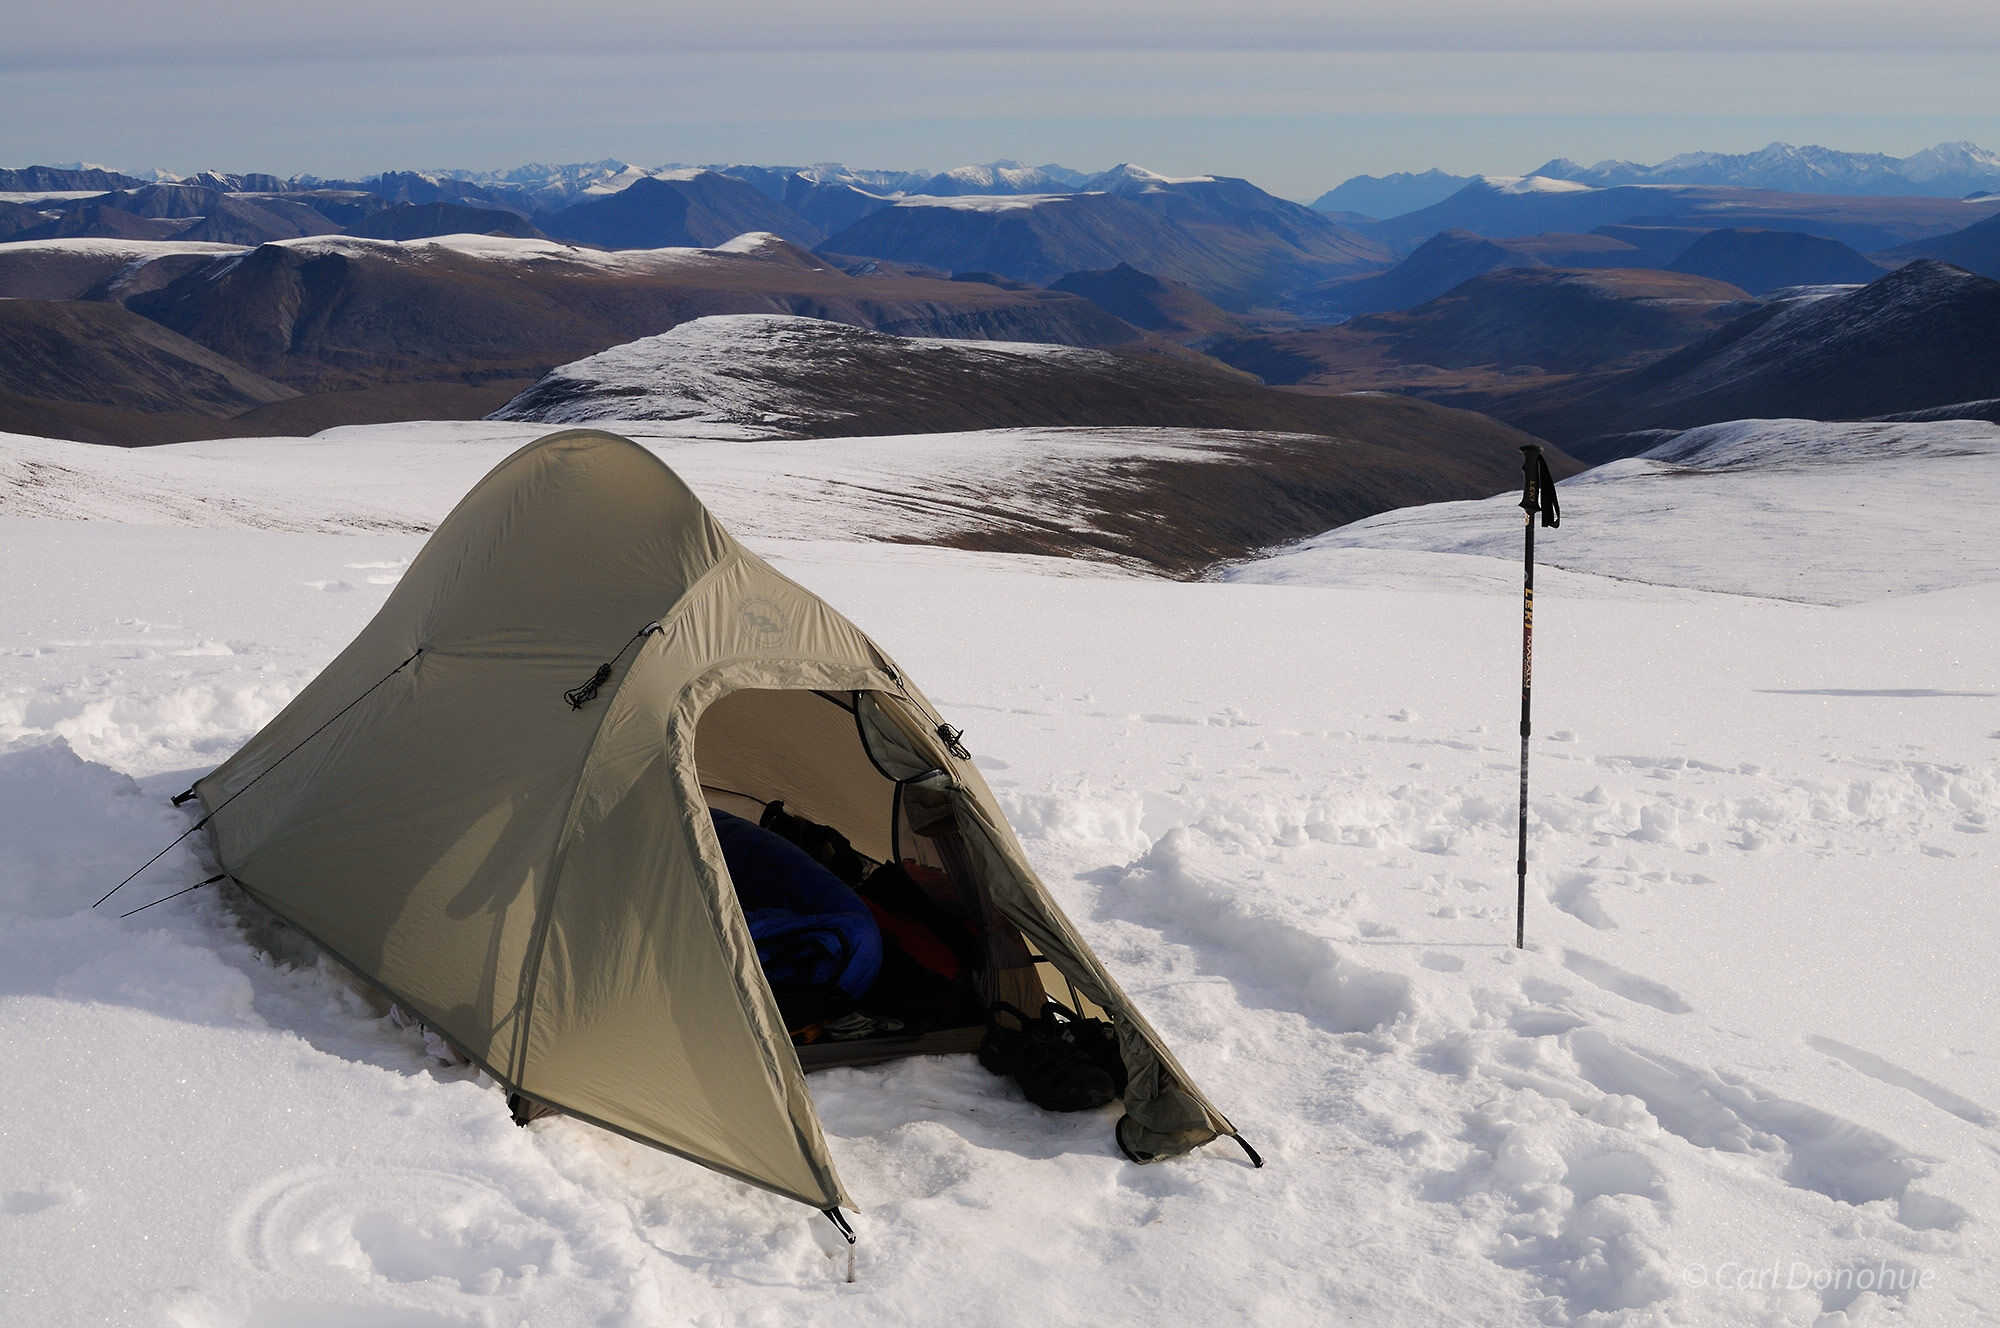 Camping in snow Wrangell - St. Elias National Park and Preserve, Alaska